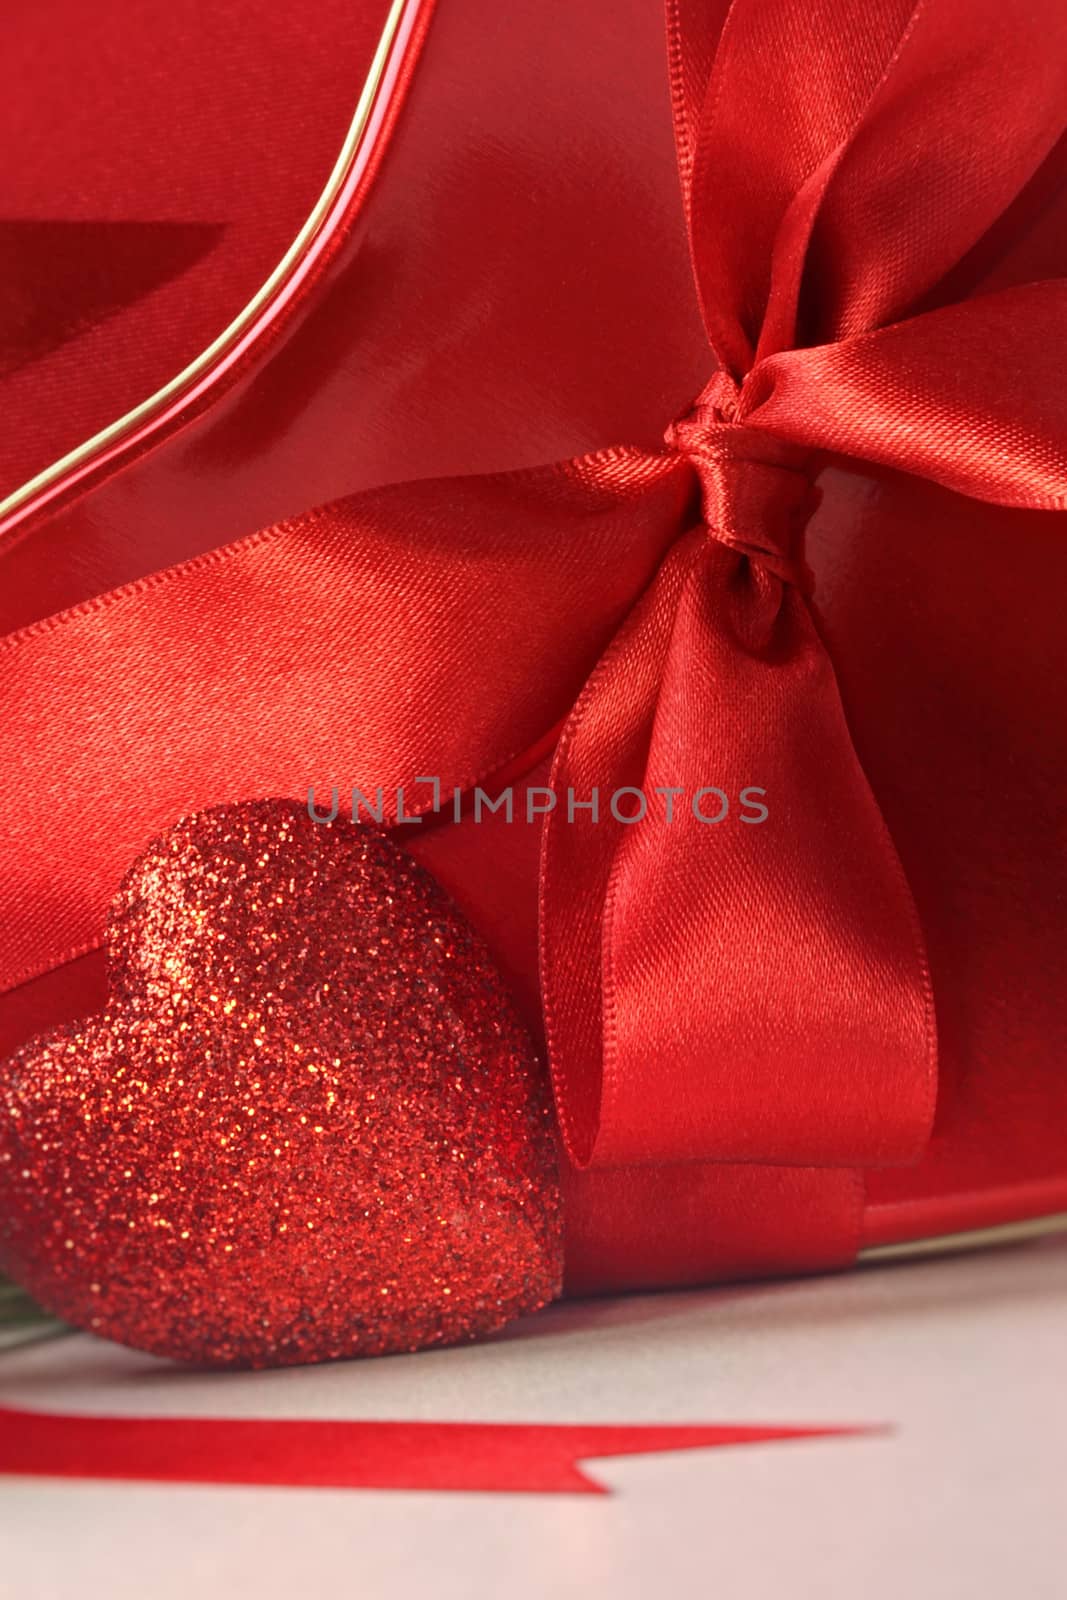 Closeup of hearts and red ribbons